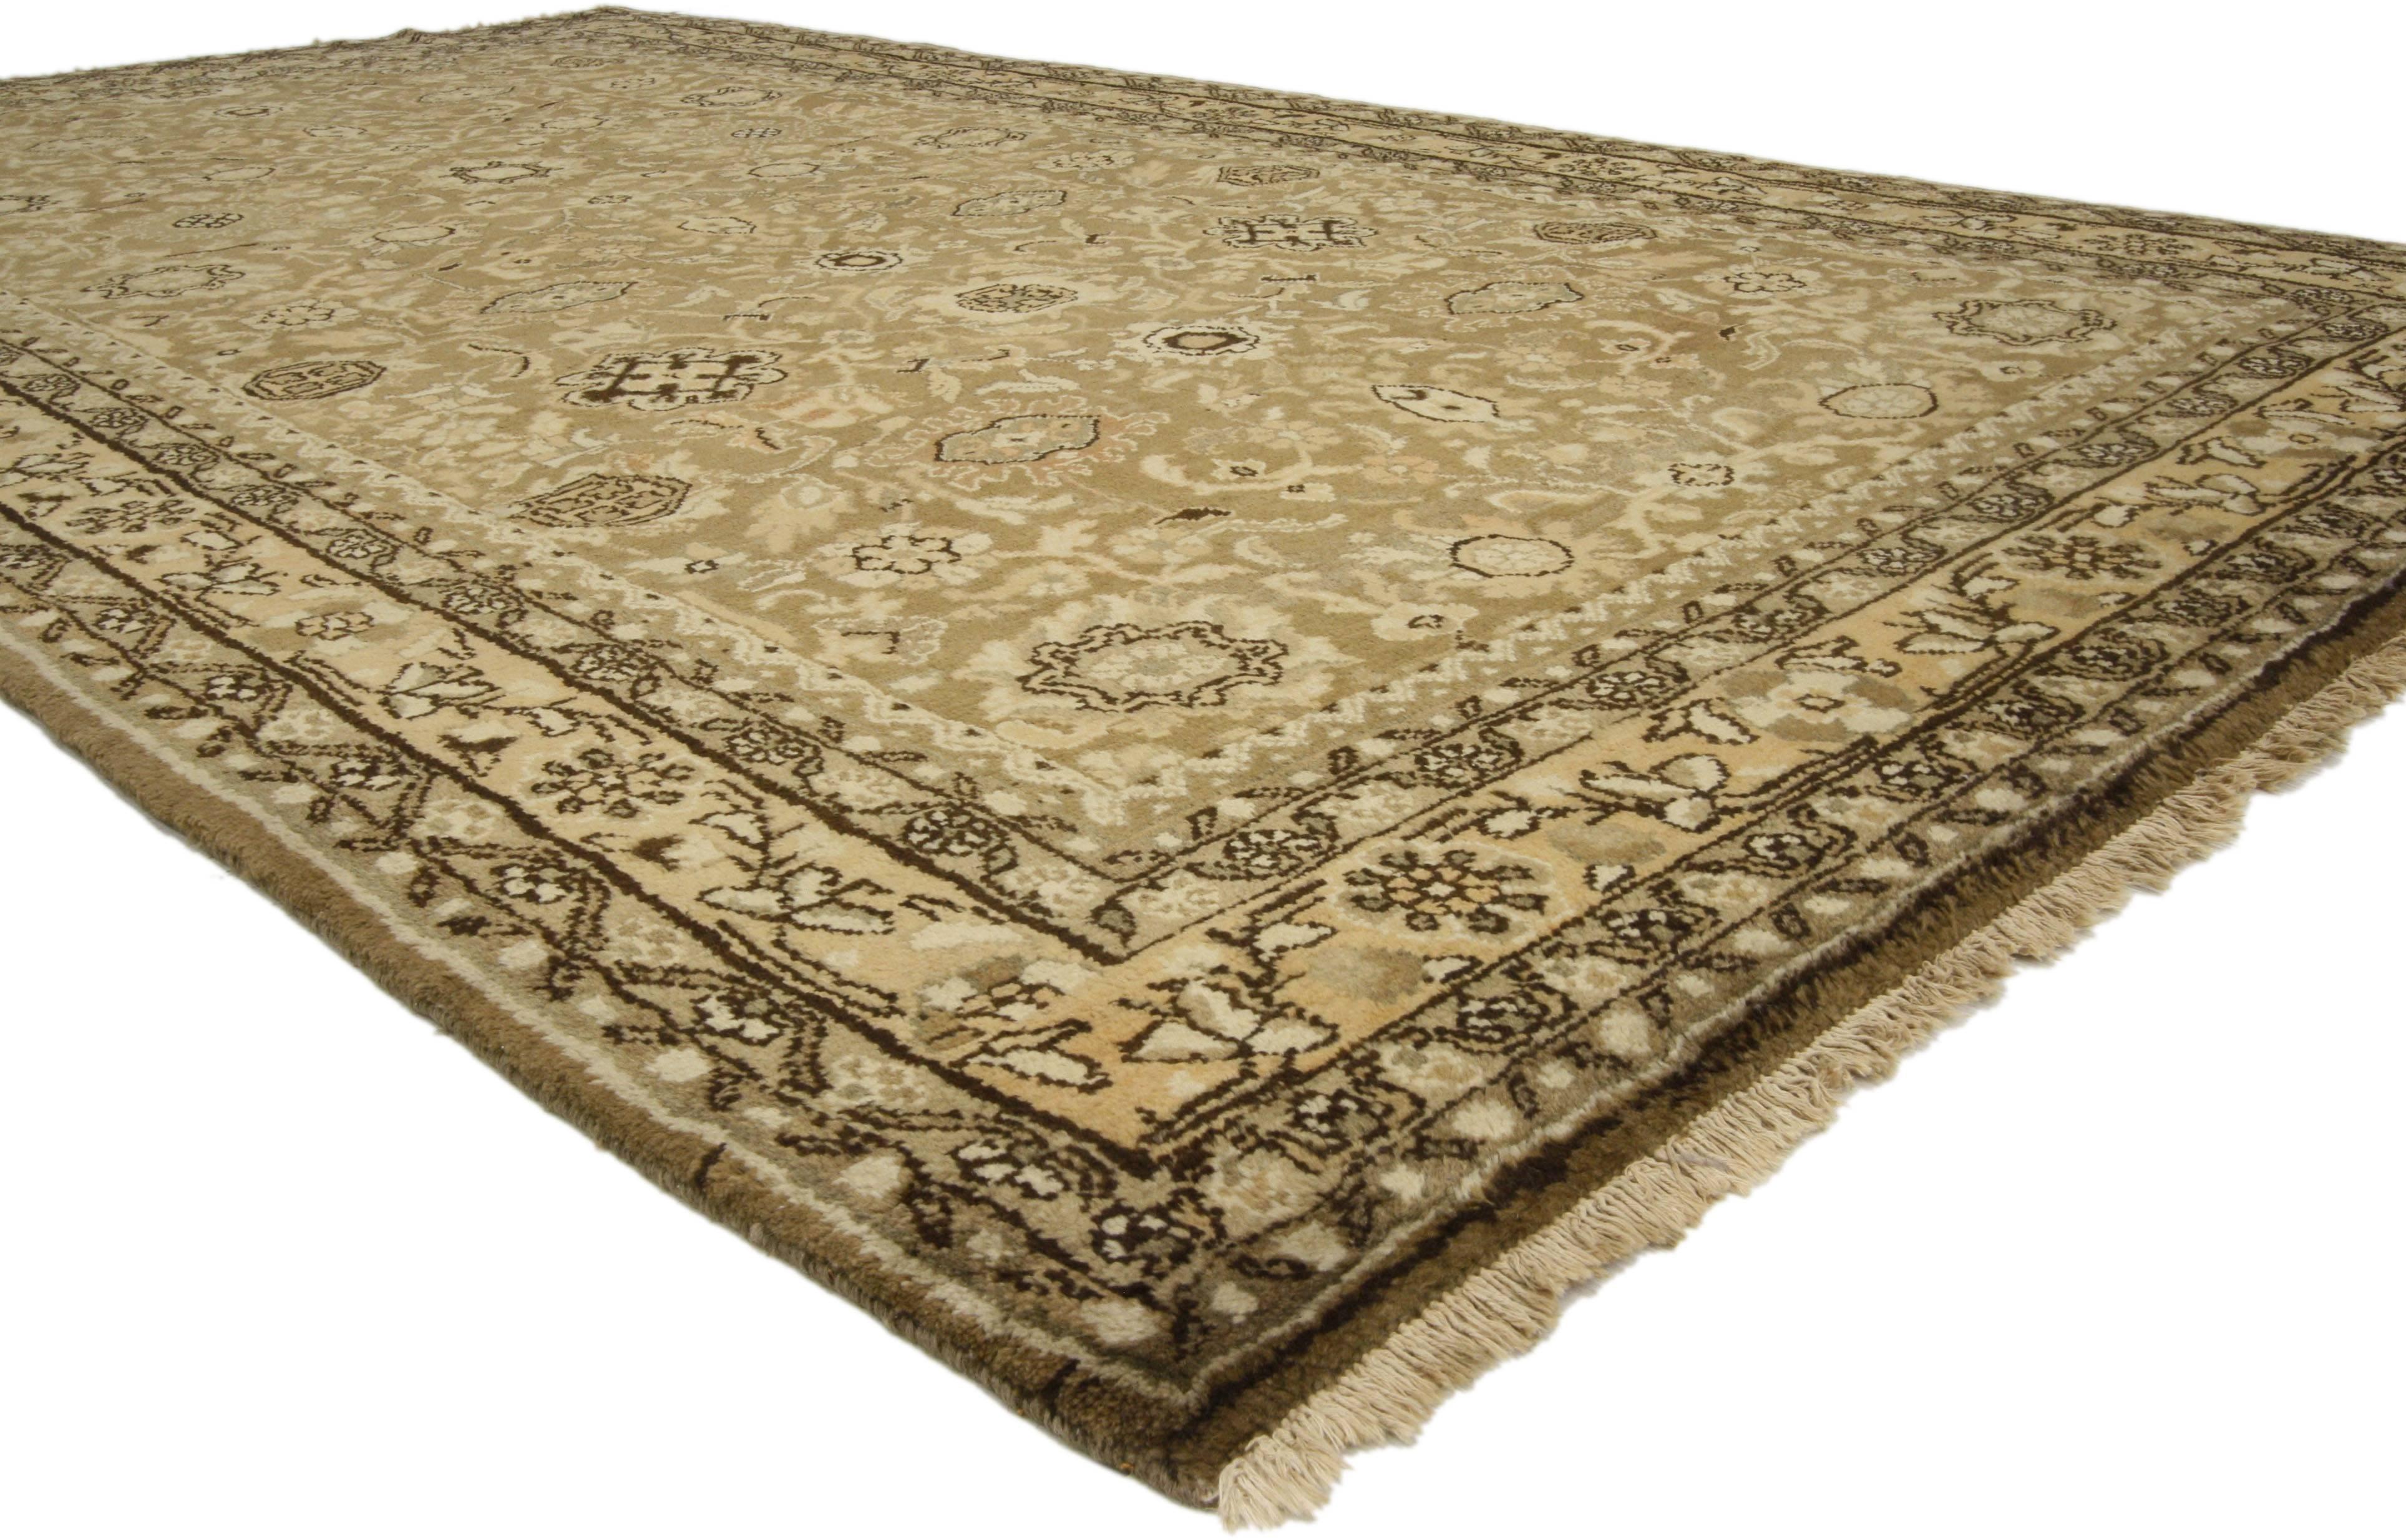 76186, vintage Persian Hamadan gallery rug with warm, neutral colors. This hand knotted wool antique-washed vintage Persian Hamadan gallery rug features an all-over arabesque floral pattern on an abrashed field. Large palmettes, scrolling vines,